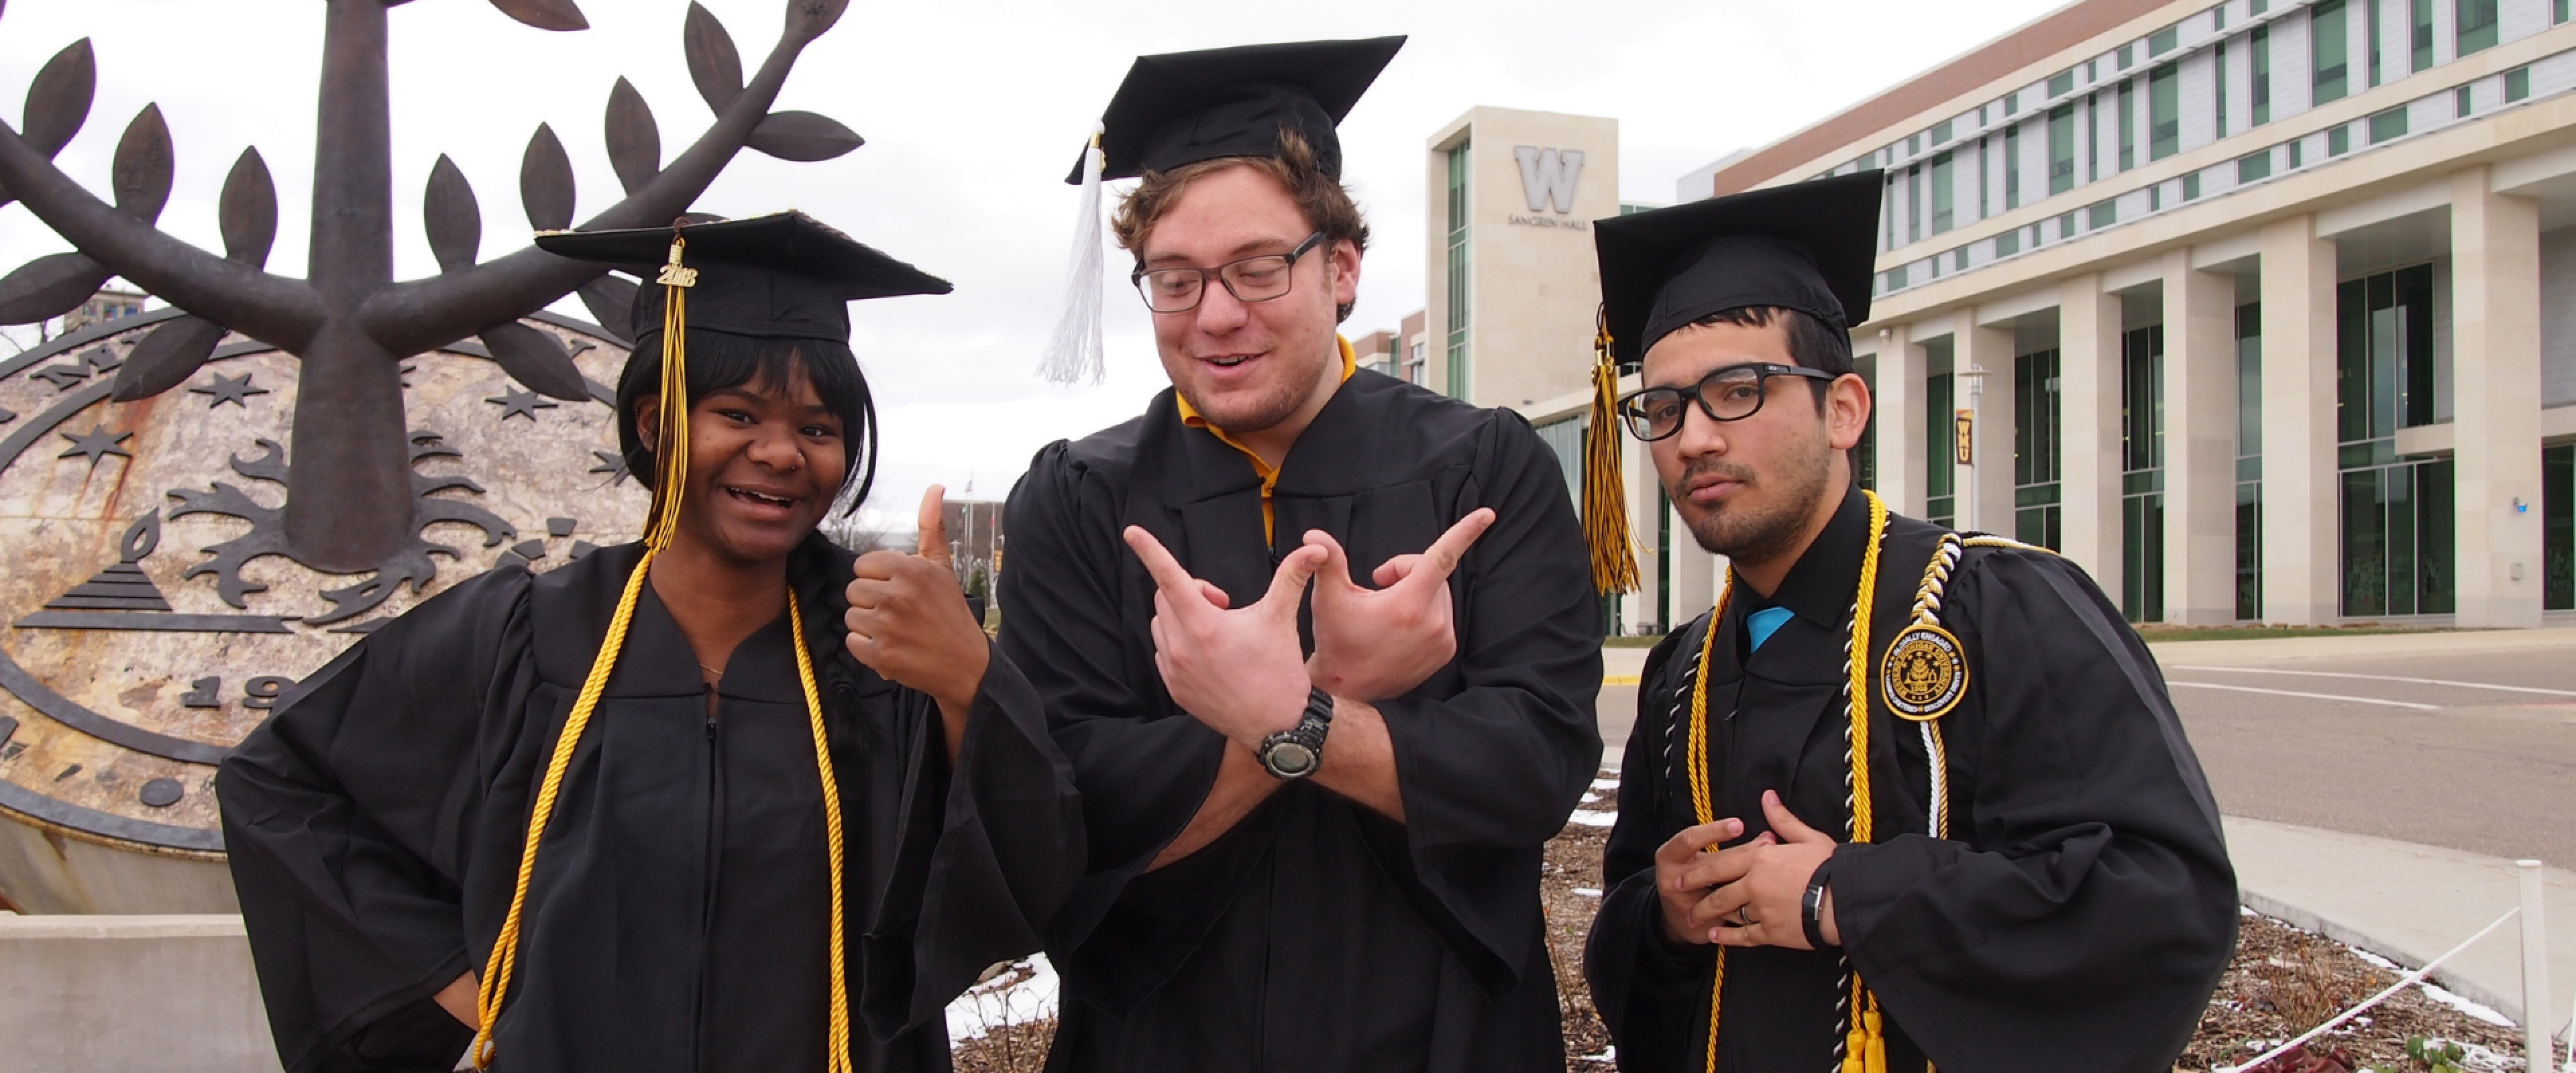 Three students standing in front of the WMU seal statue in their caps and gowns. One student is forming the letter "W" with four fingers.